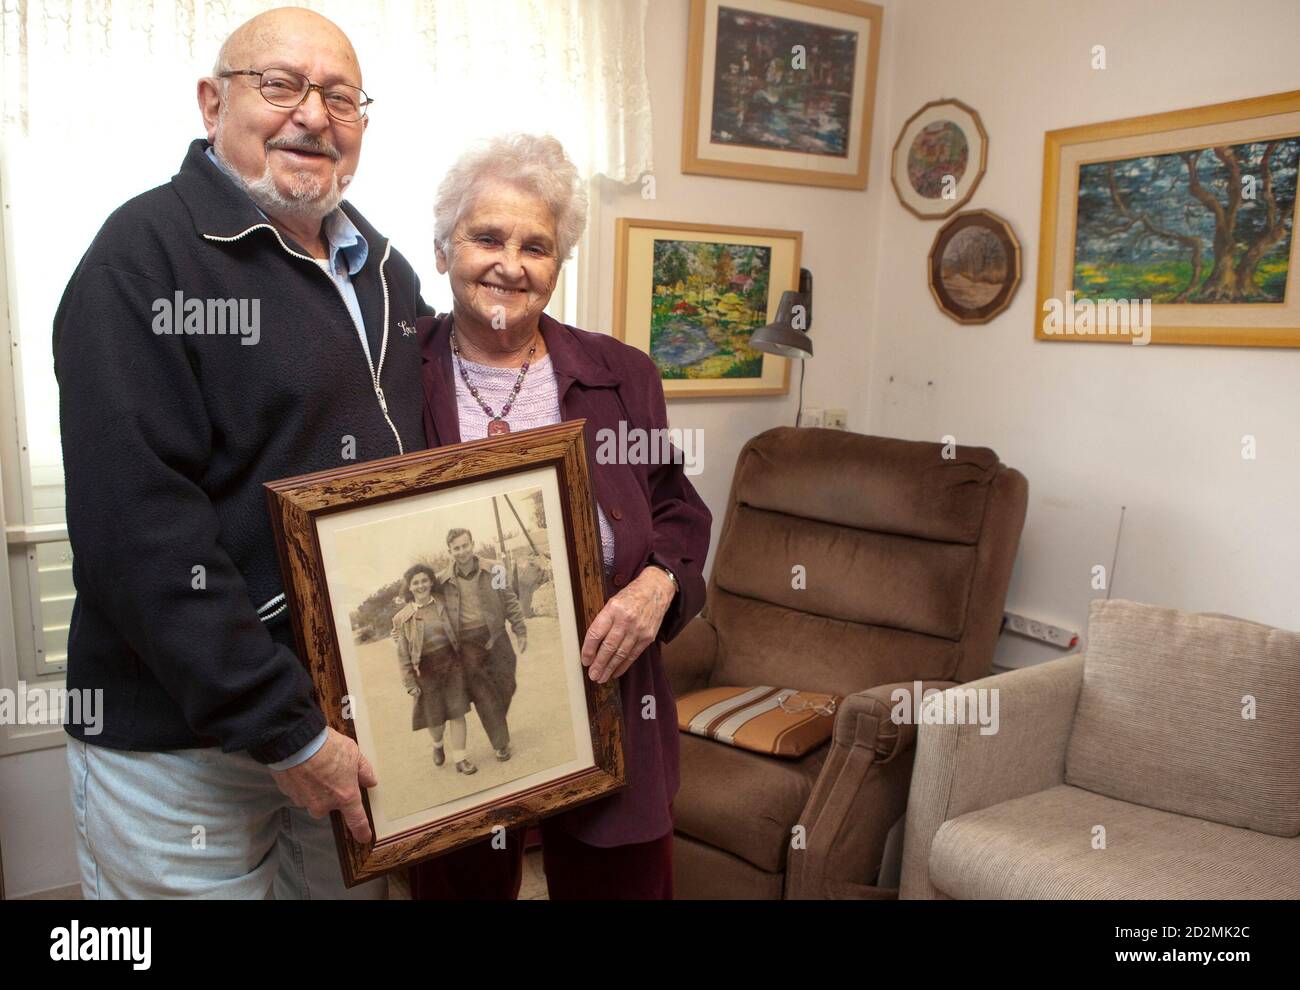 Holocaust survivors Yehudit (R) and Ezra Amit hold a photograph of themselves when they were younger, at their home in Kibbutz Shaar Haamakim in northern Israel April 9, 2010. The couple wed in British-ruled Palestine and currently have four children and seven grandchildren. Starting Sunday evening, Israel marks the annual memorial day commemorating the six million Jews killed by the Nazis in the Holocaust during World War Two. Picture taken April 9, 2010. REUTERS/Baz Ratner     (ISRAEL - Tags: ANNIVERSARY CONFLICT) Stock Photo